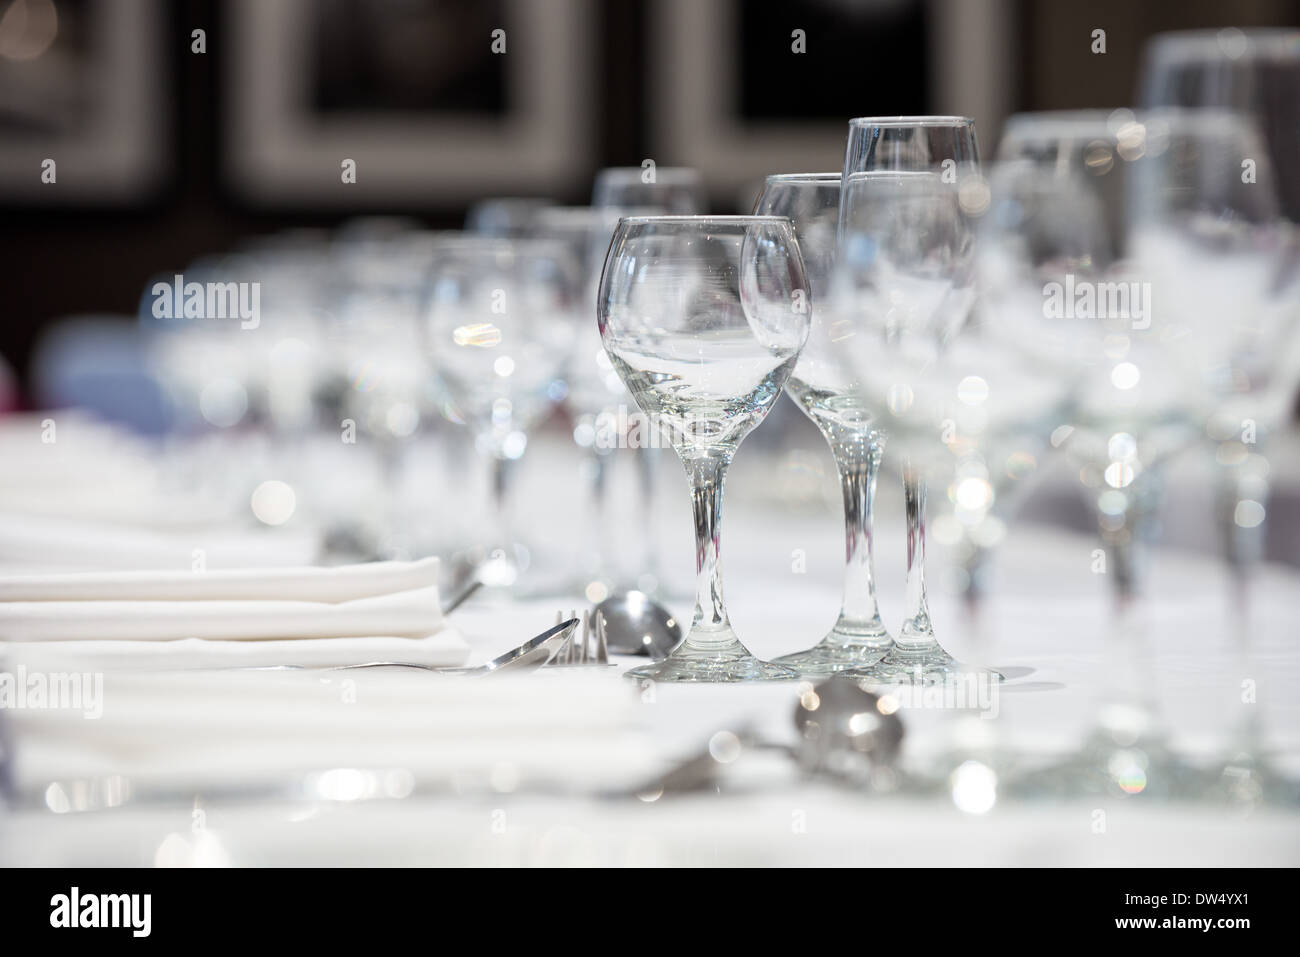 A shallow focus image of a banquet tables place settings & wine glasses awaiting the arrival of the dinners Stock Photo